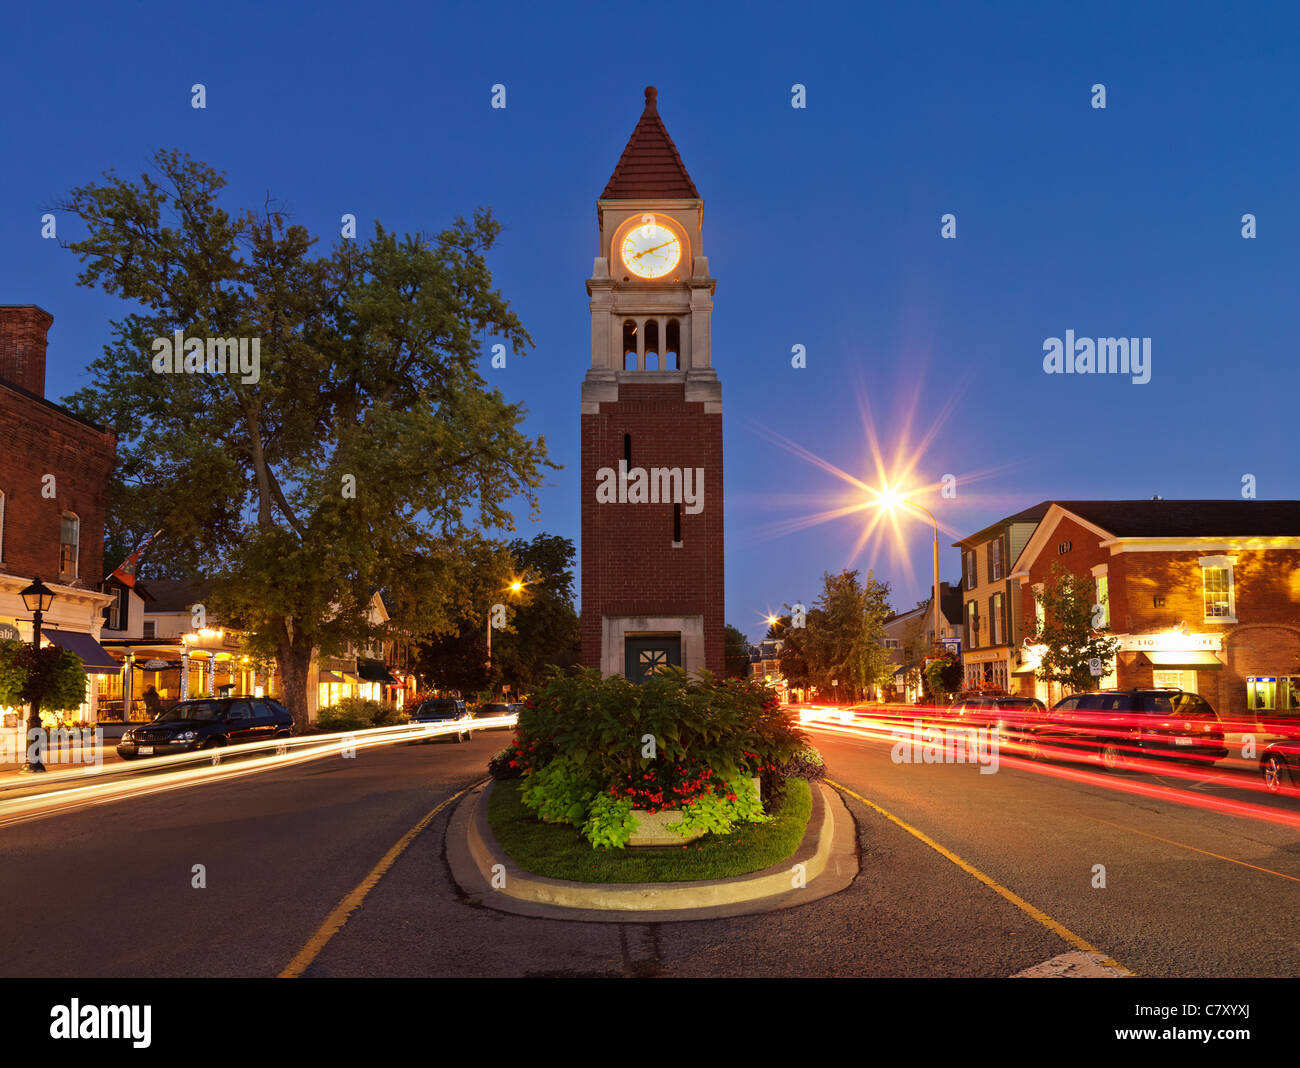 Canada,Ontario,Niagara-on-the-Lake, the clock tower (cenotaph) on Queen Street at dusk Stock Photo